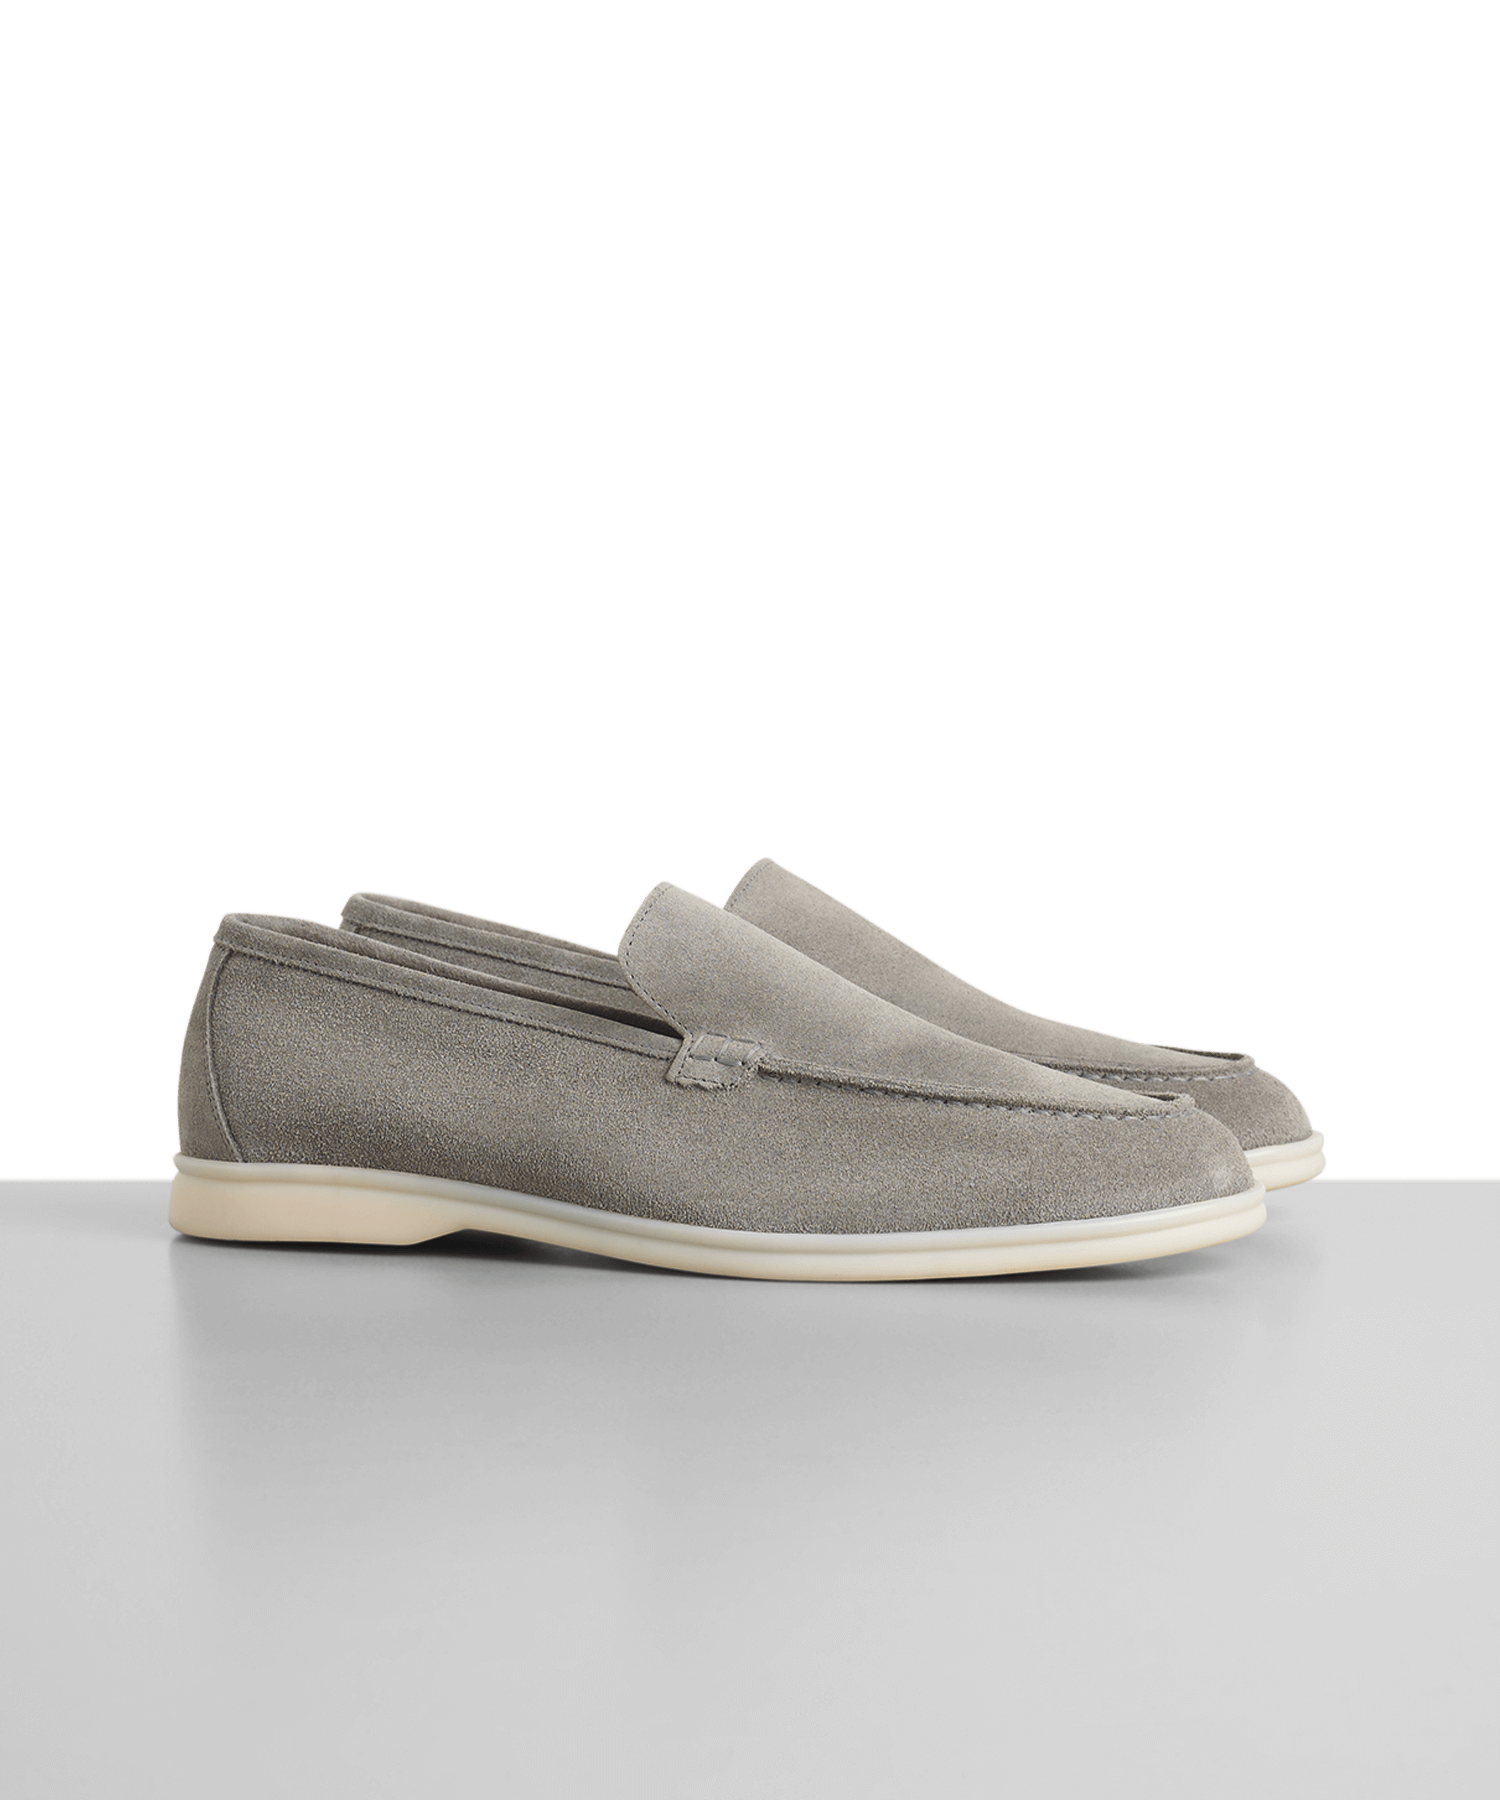 SOCI3TY Summer loafer suede grijs - The Society Shop